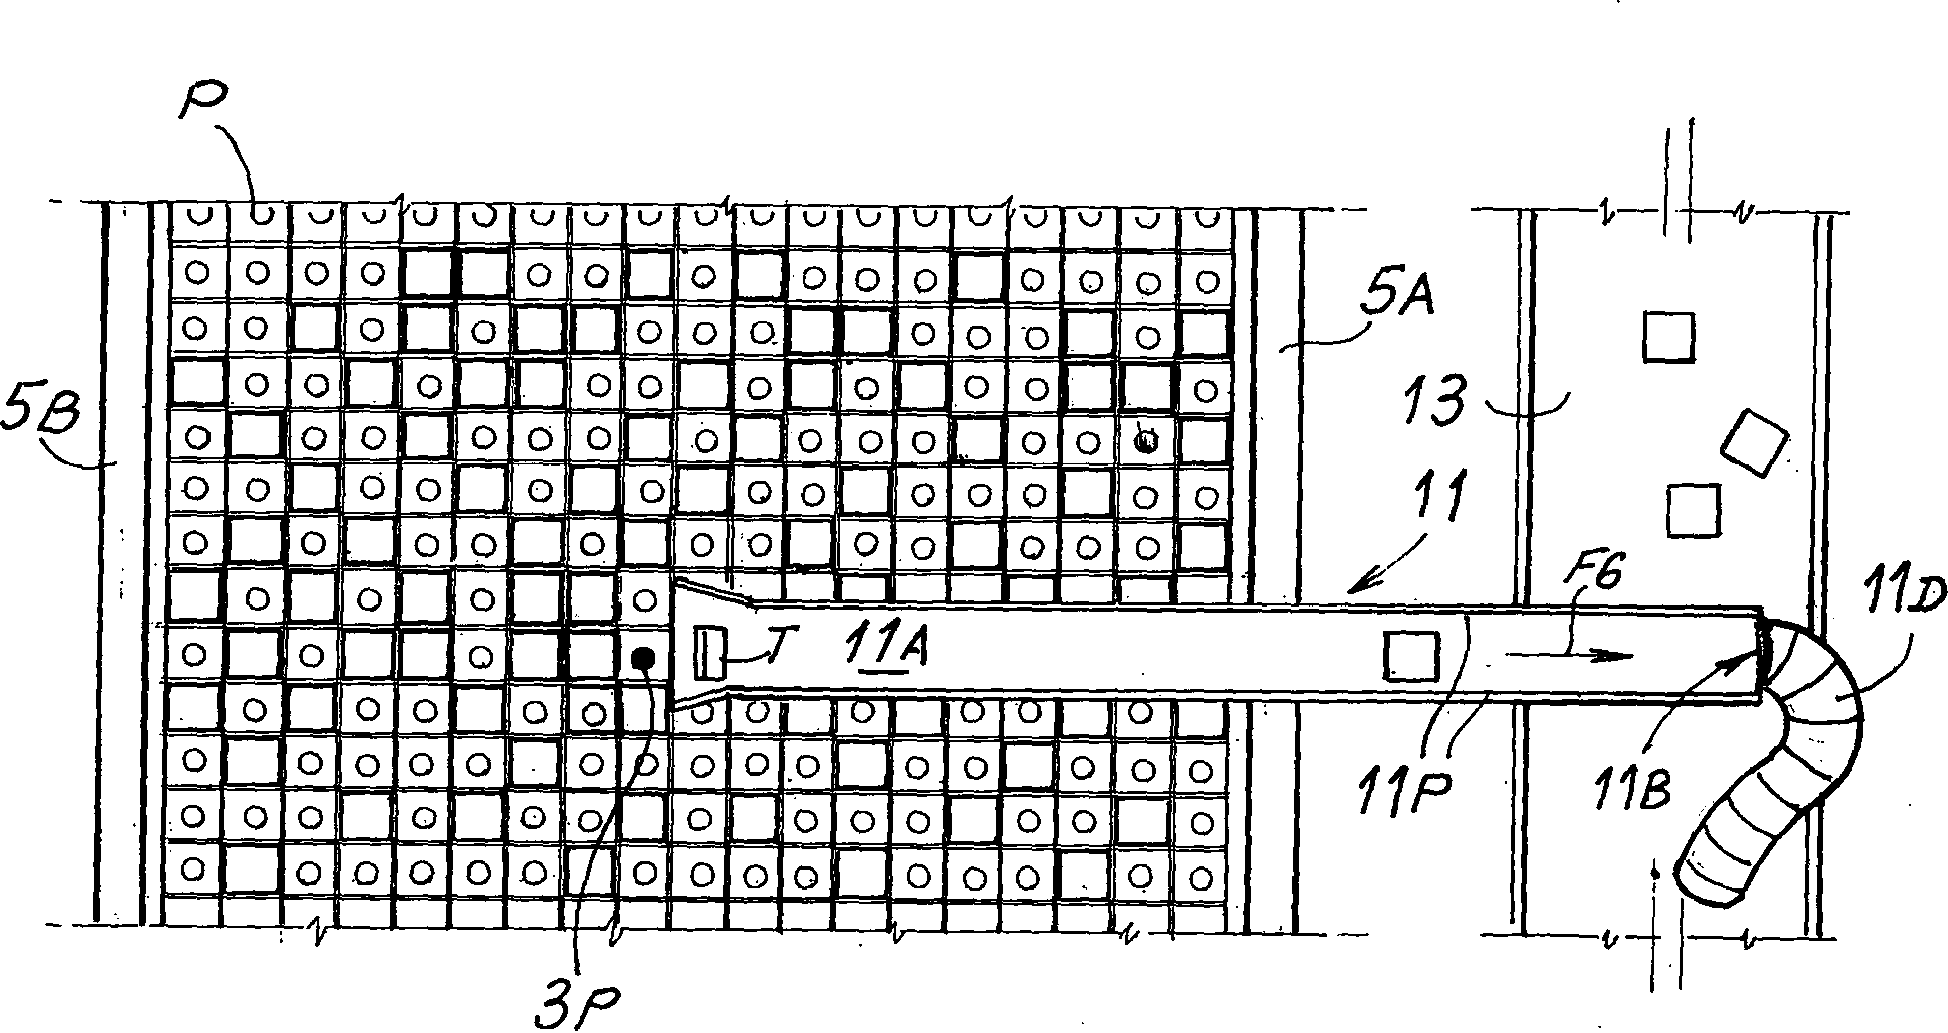 A machine and a method for filling containment panels with tiles to form mosaic patterns